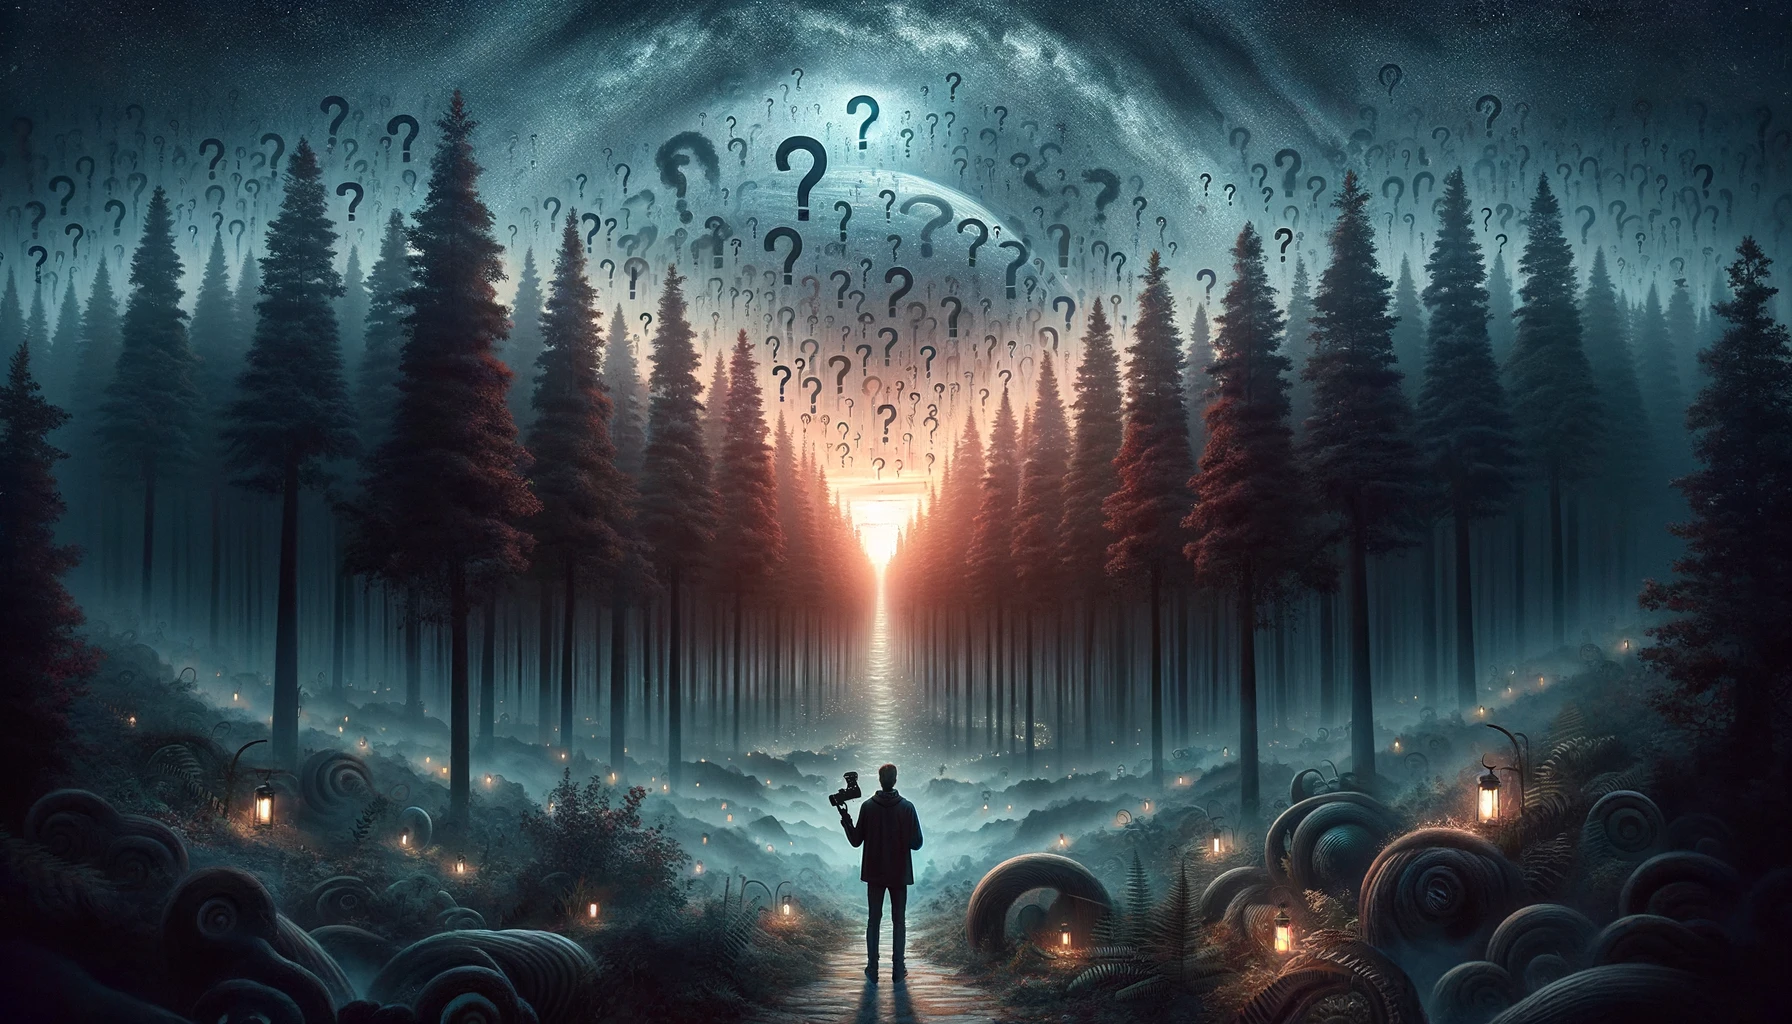 A lone explorer at the forest's edge, camera poised, faces the enigmatic depths of the woods under a twilight sky, symbolizing a personal quest for understanding amidst life's mysteries.